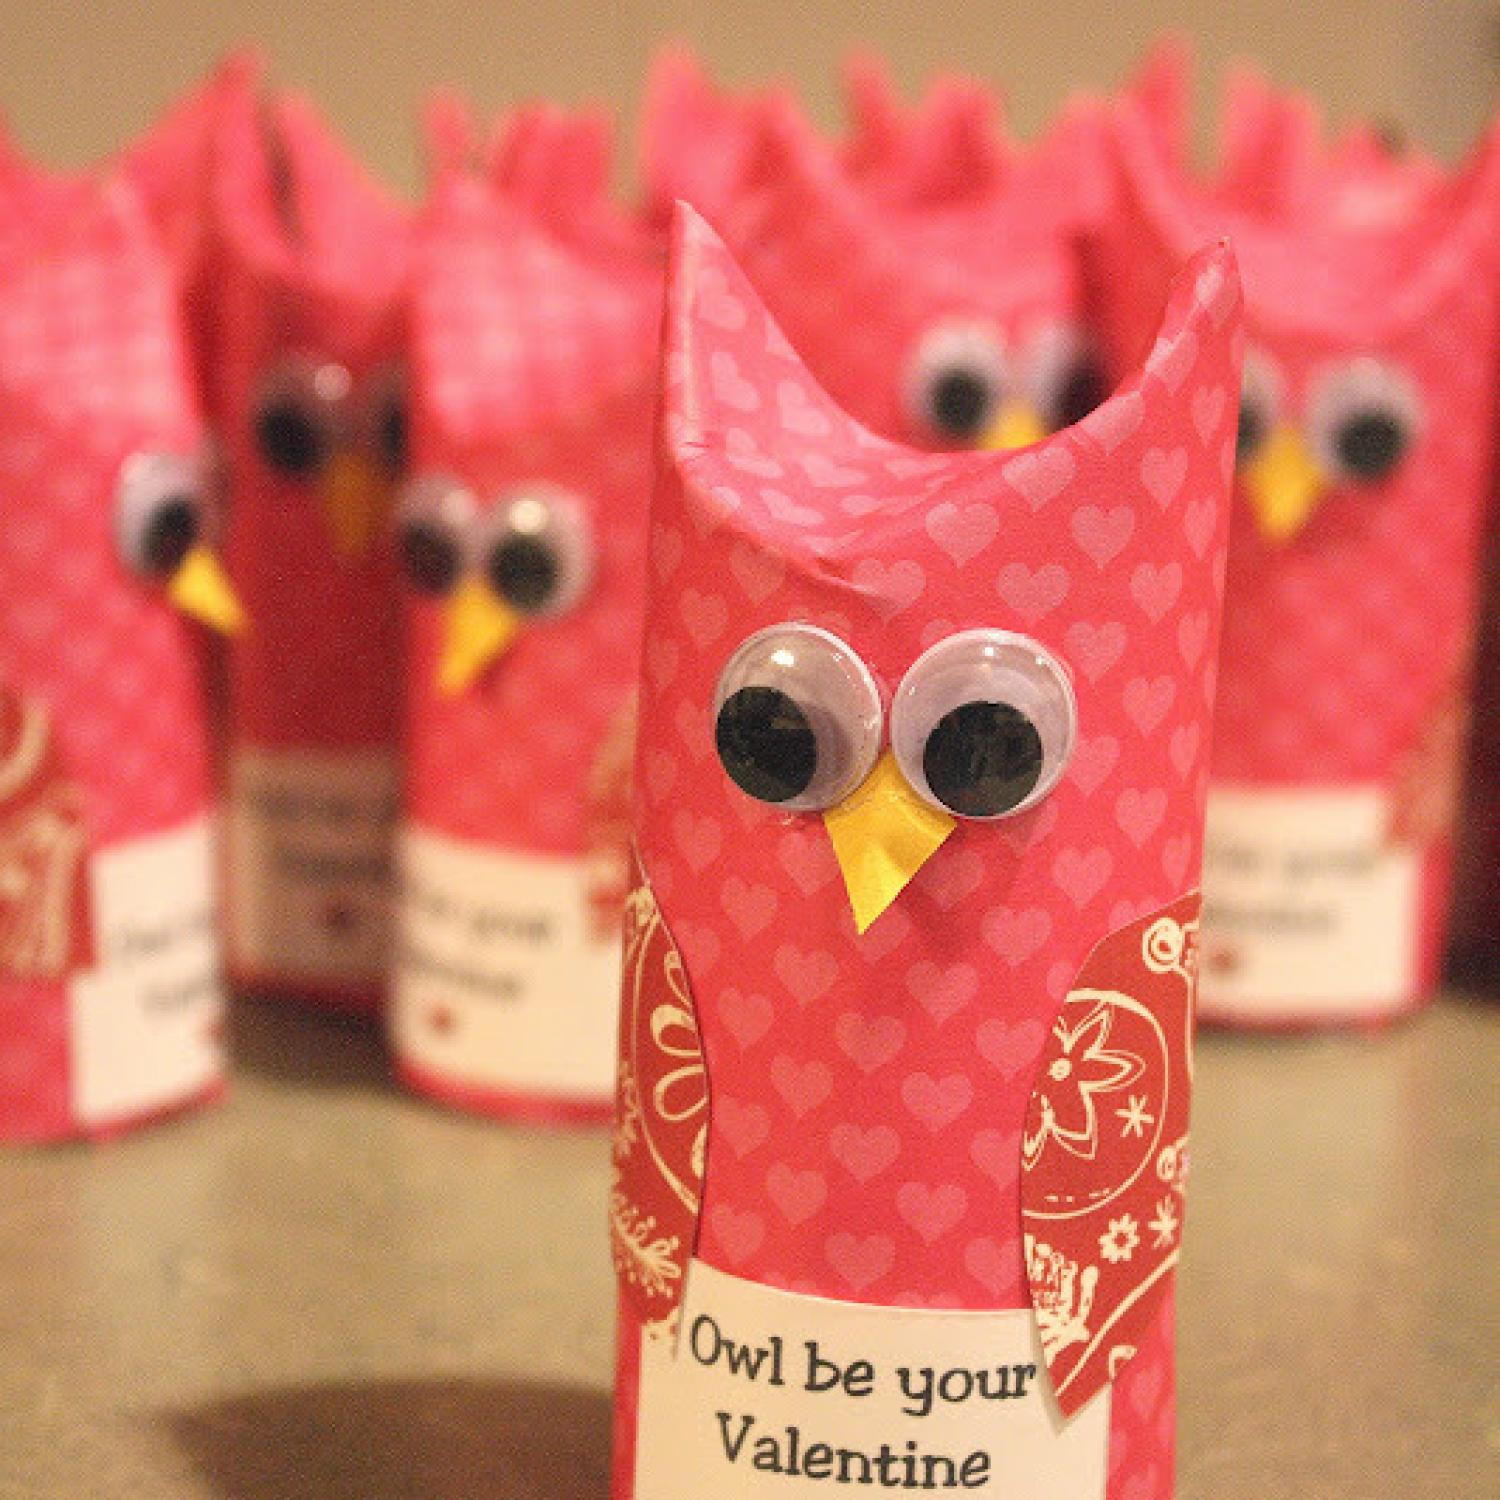 Valentines Day Home Made Gifts
 Our Favorite Homemade Valentines for Kids